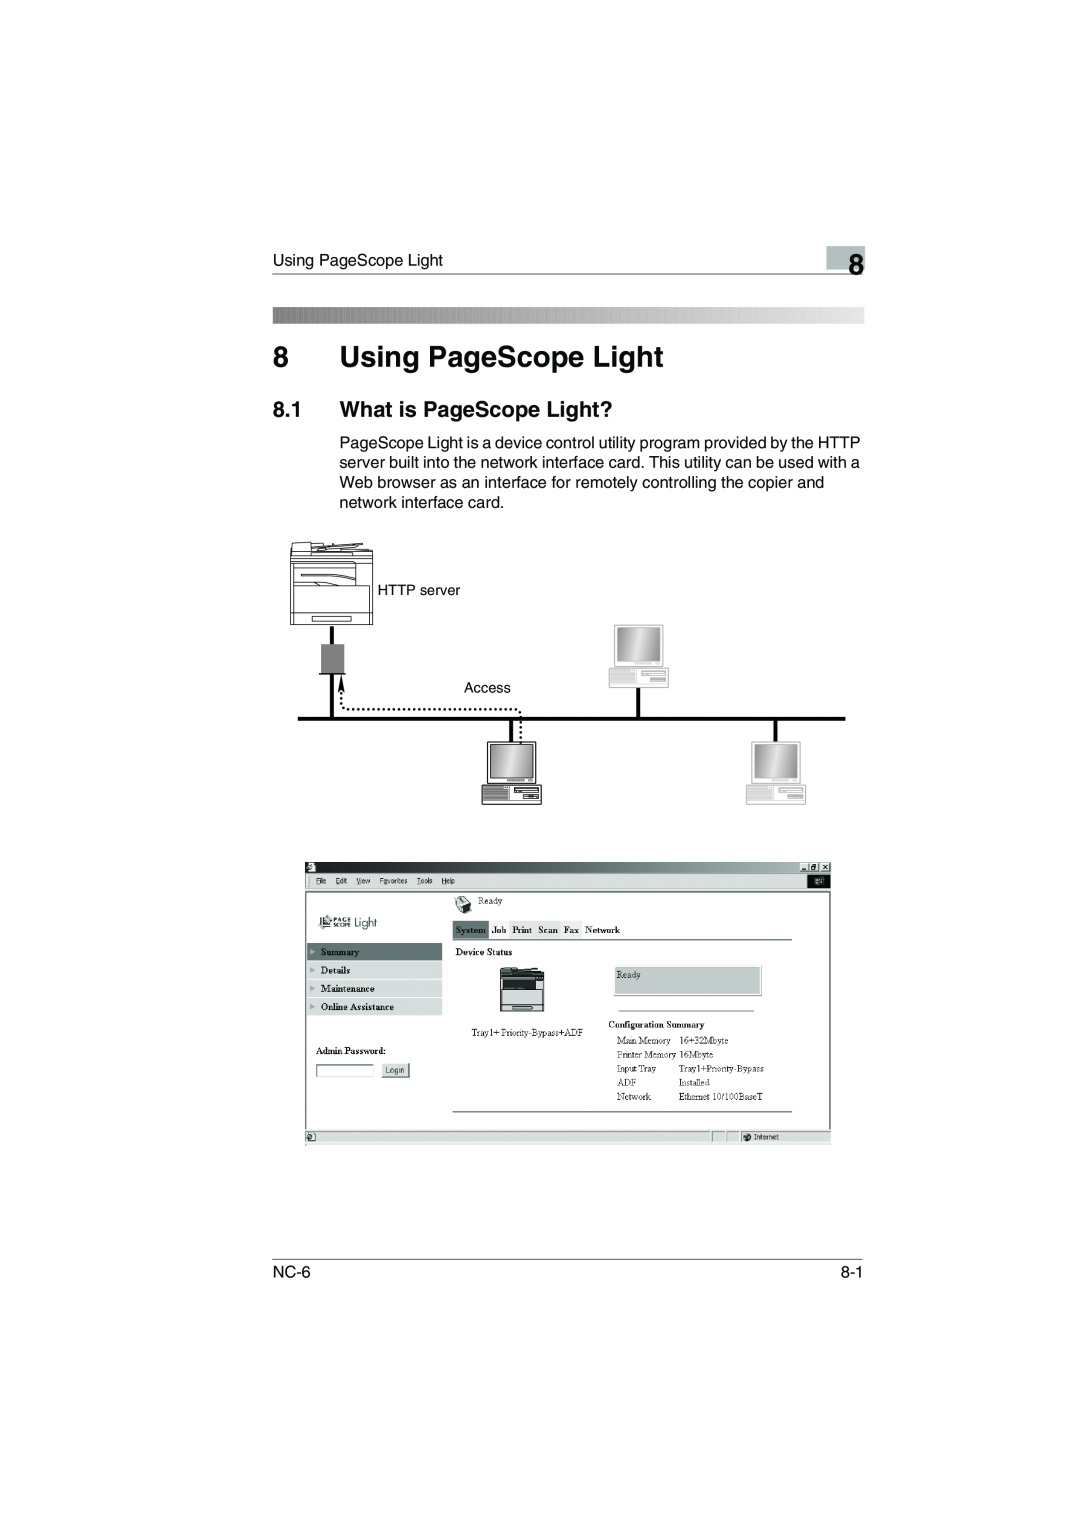 Konica Minolta NC-6 user manual Using PageScope Light, What is PageScope Light?, HTTP server Access 